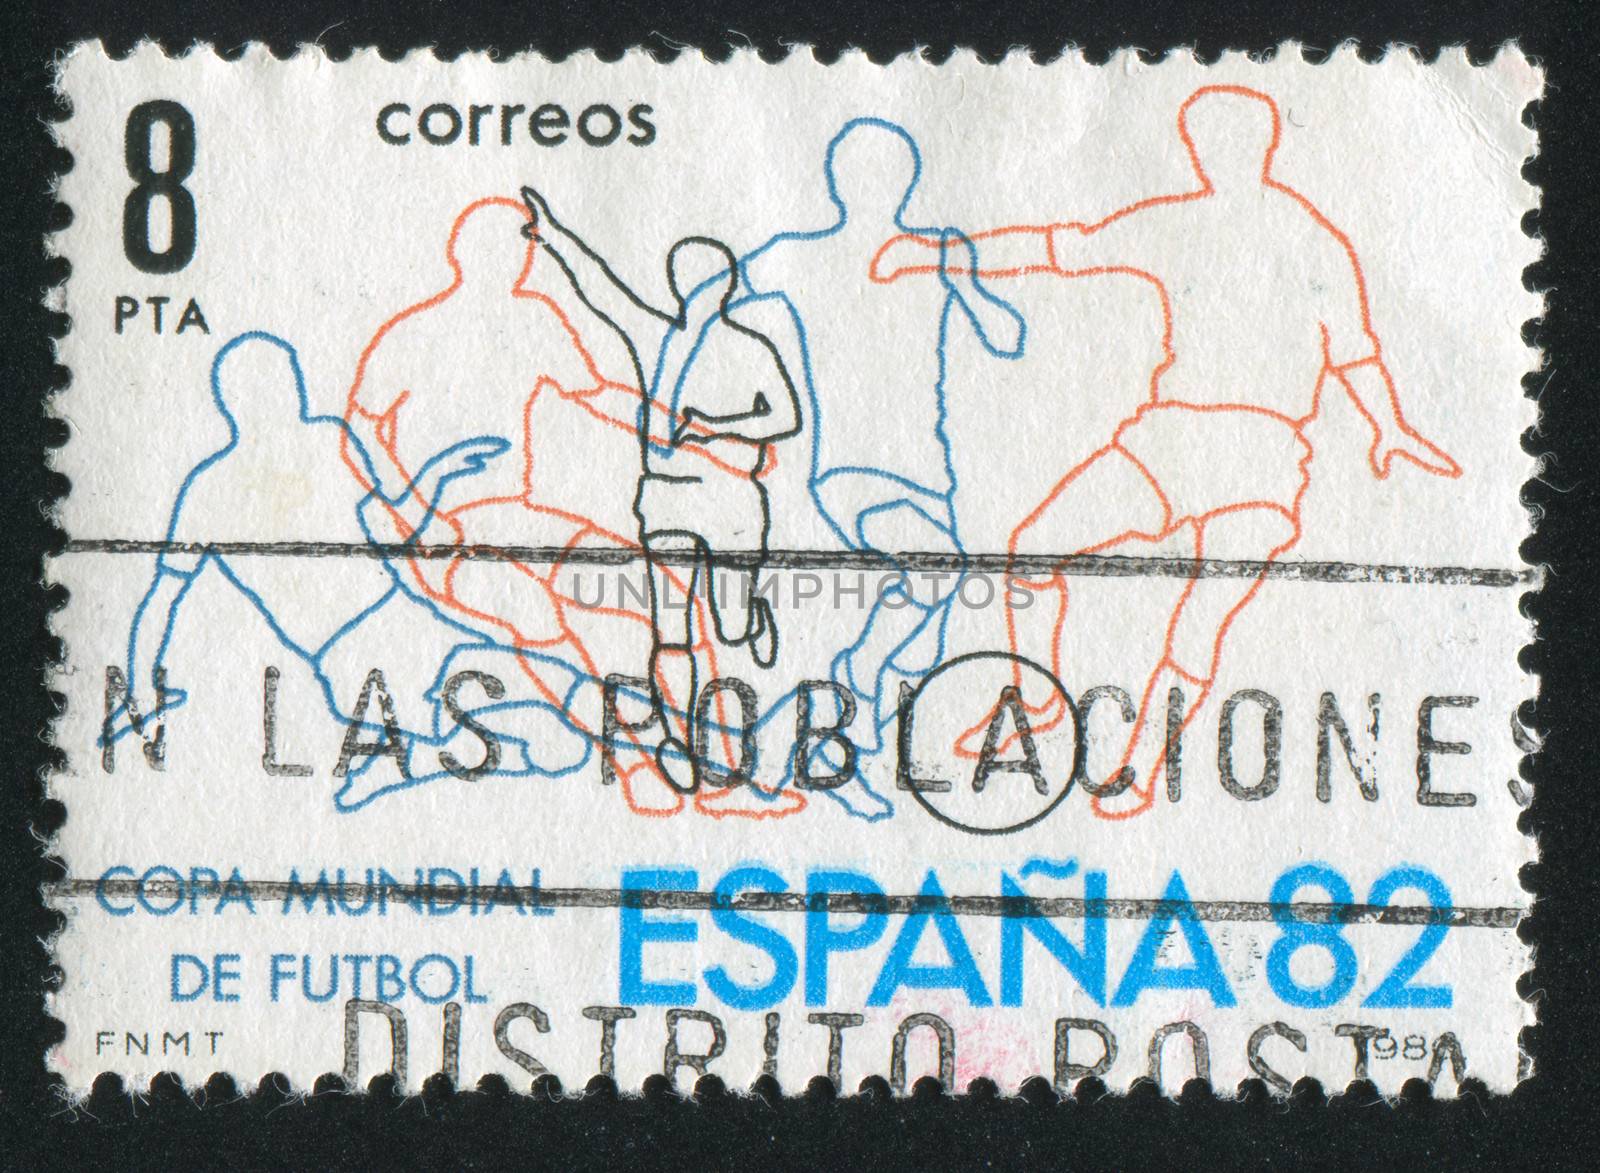 SPAIN - CIRCA 1980: stamp printed by Spain, shows Soccer players, circa 1980